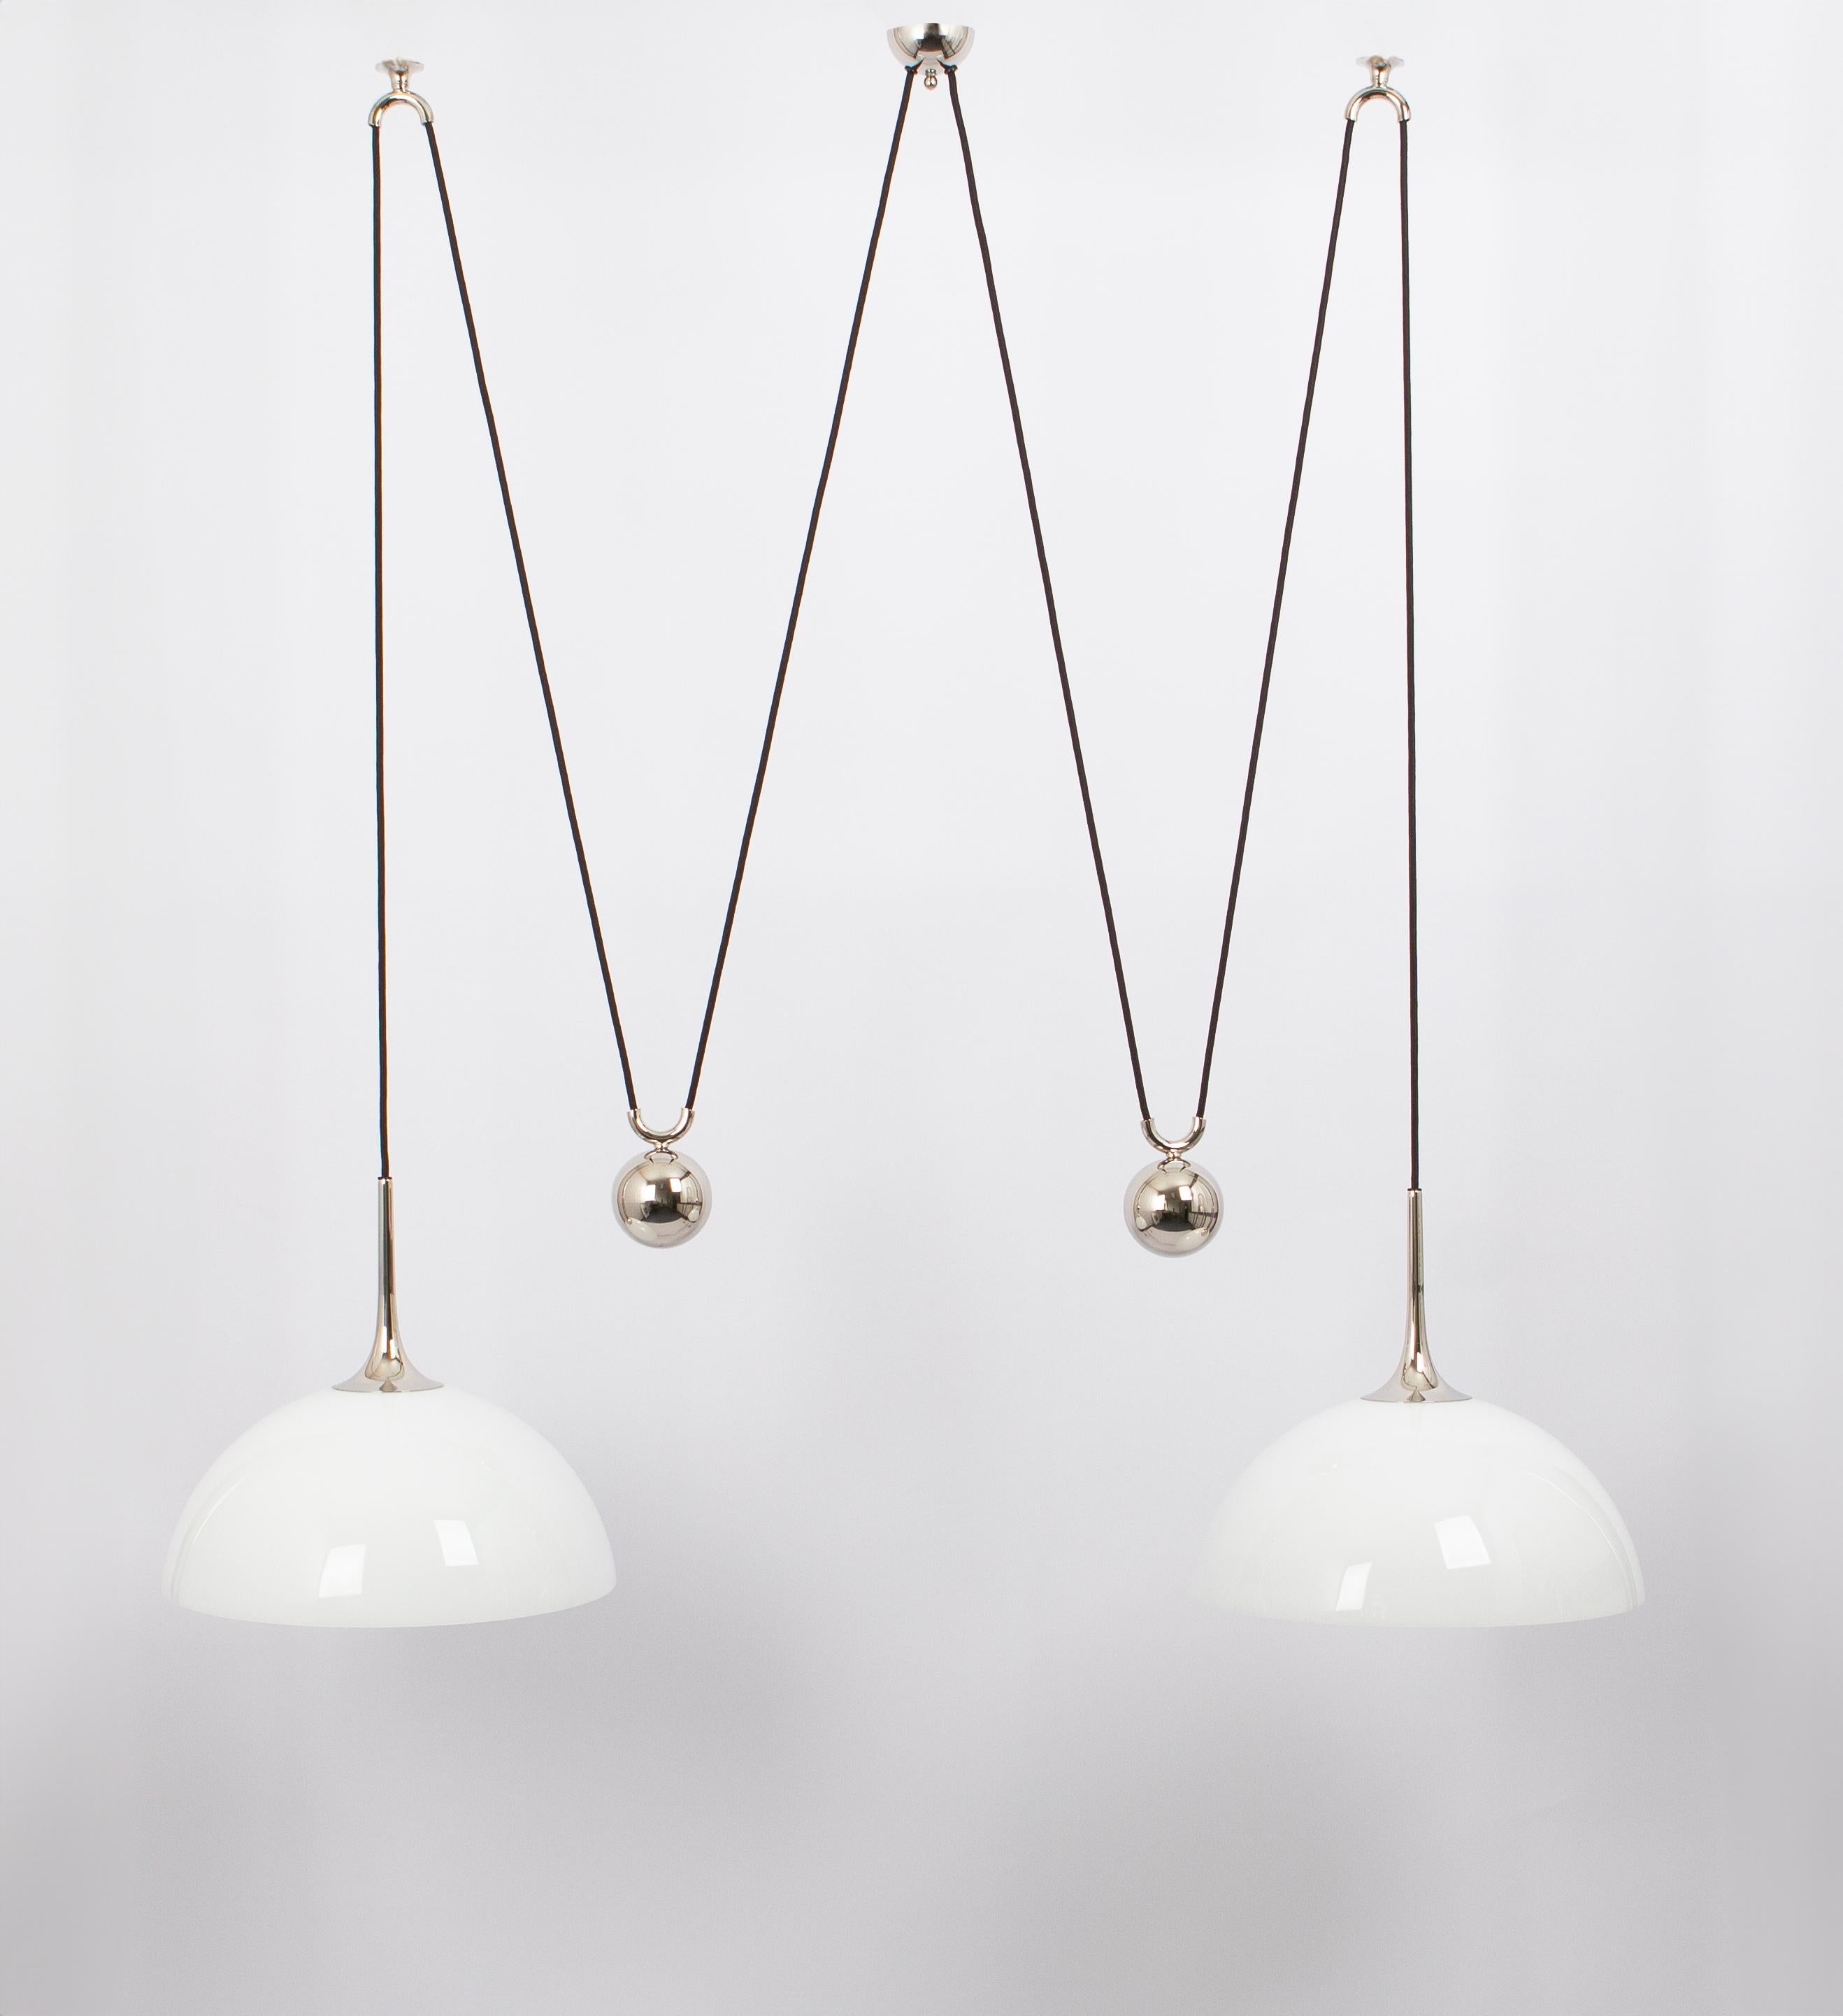 German Stunning Double Chrome Pendant with Adjustable Counter Weights by Florian Schulz For Sale